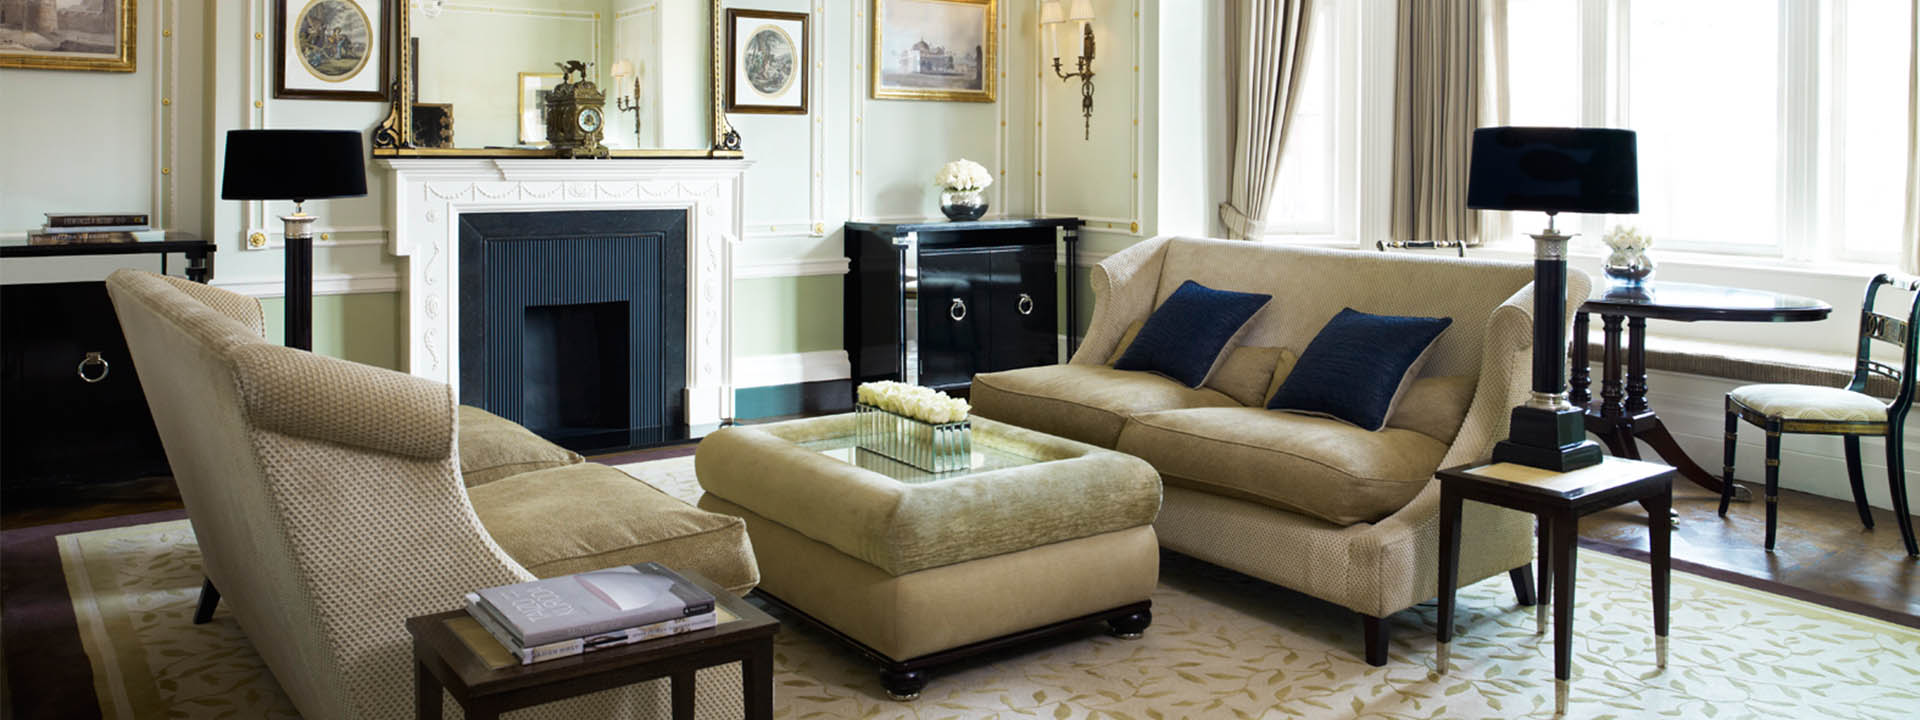 Living room in the luxurious interior of The Connaught suite, with comfortable beige sofas.